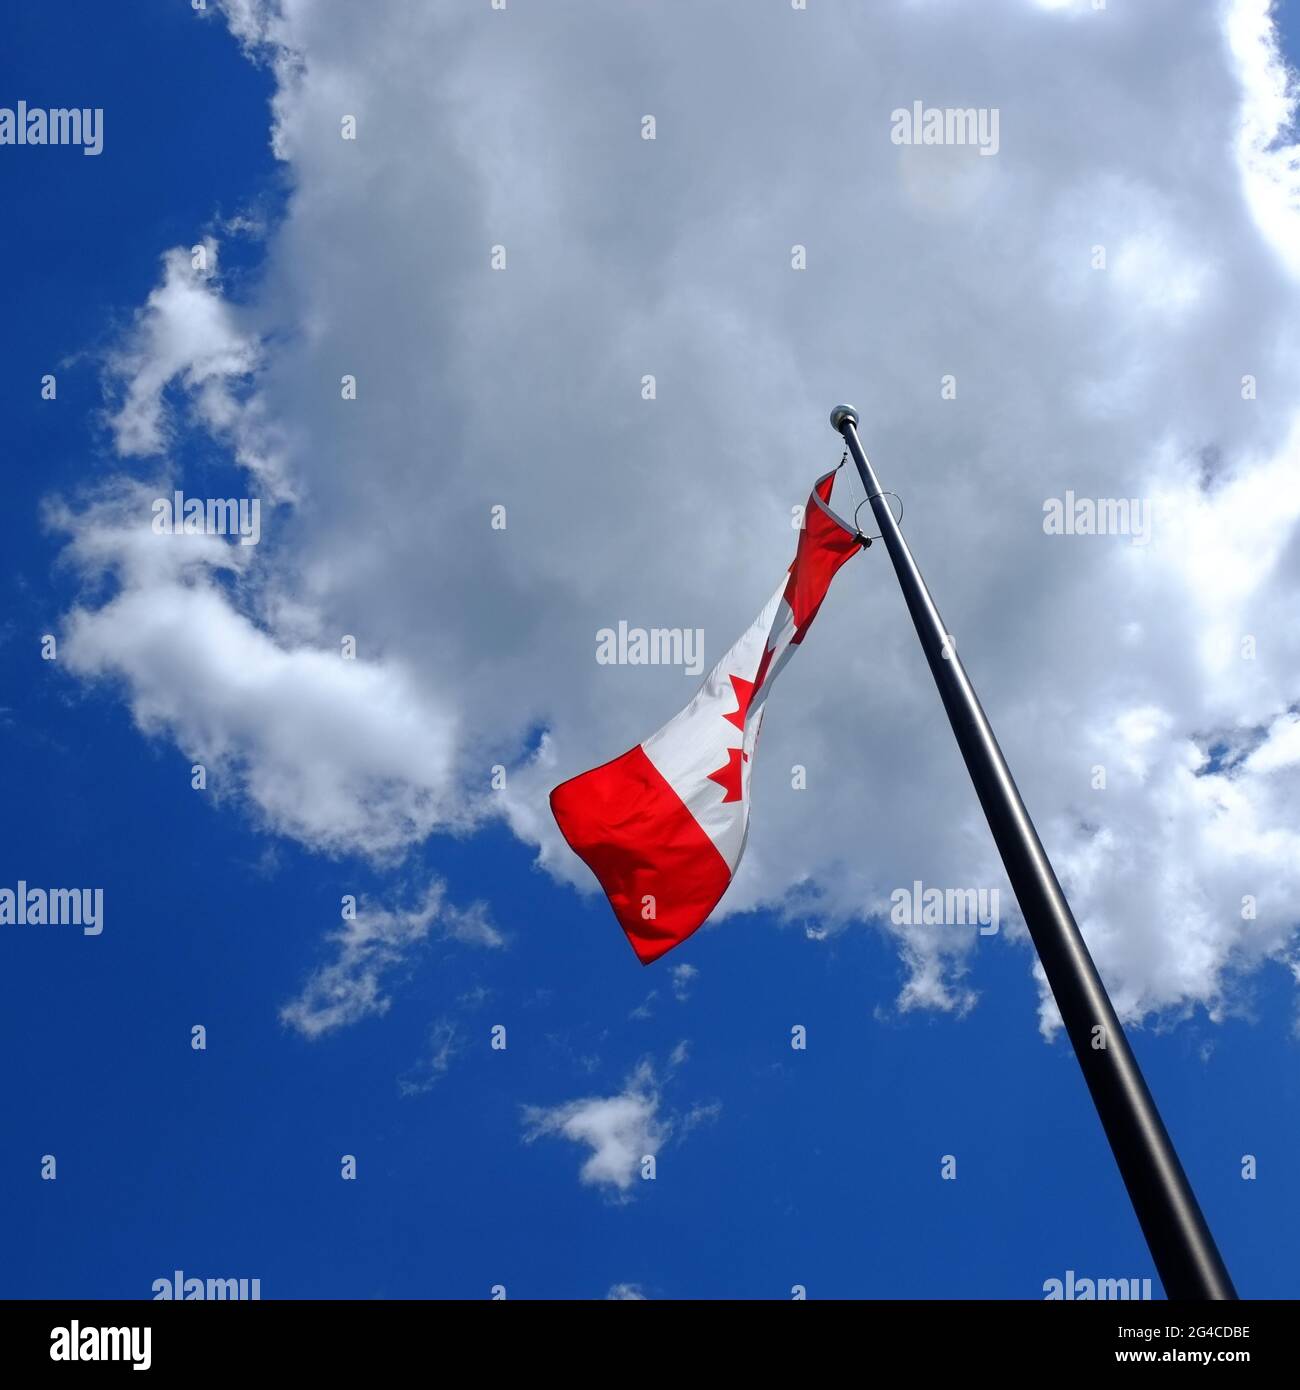 Canada maple leaf flag flapping in a gentle breeze and against a summery bright blue sky with puffy white clouds. Stock Photo